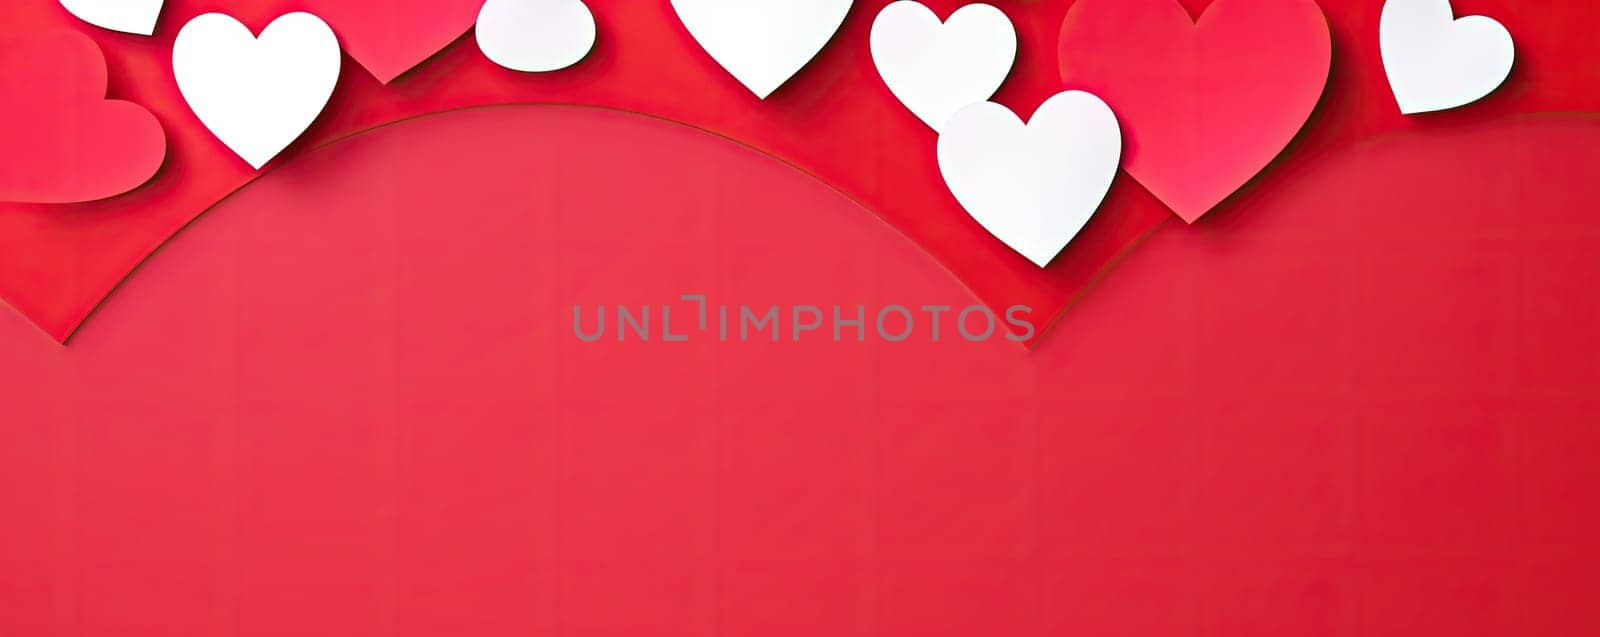 Red Hearts on a Red Background: A Symbol of Love and Romance by Yurich32